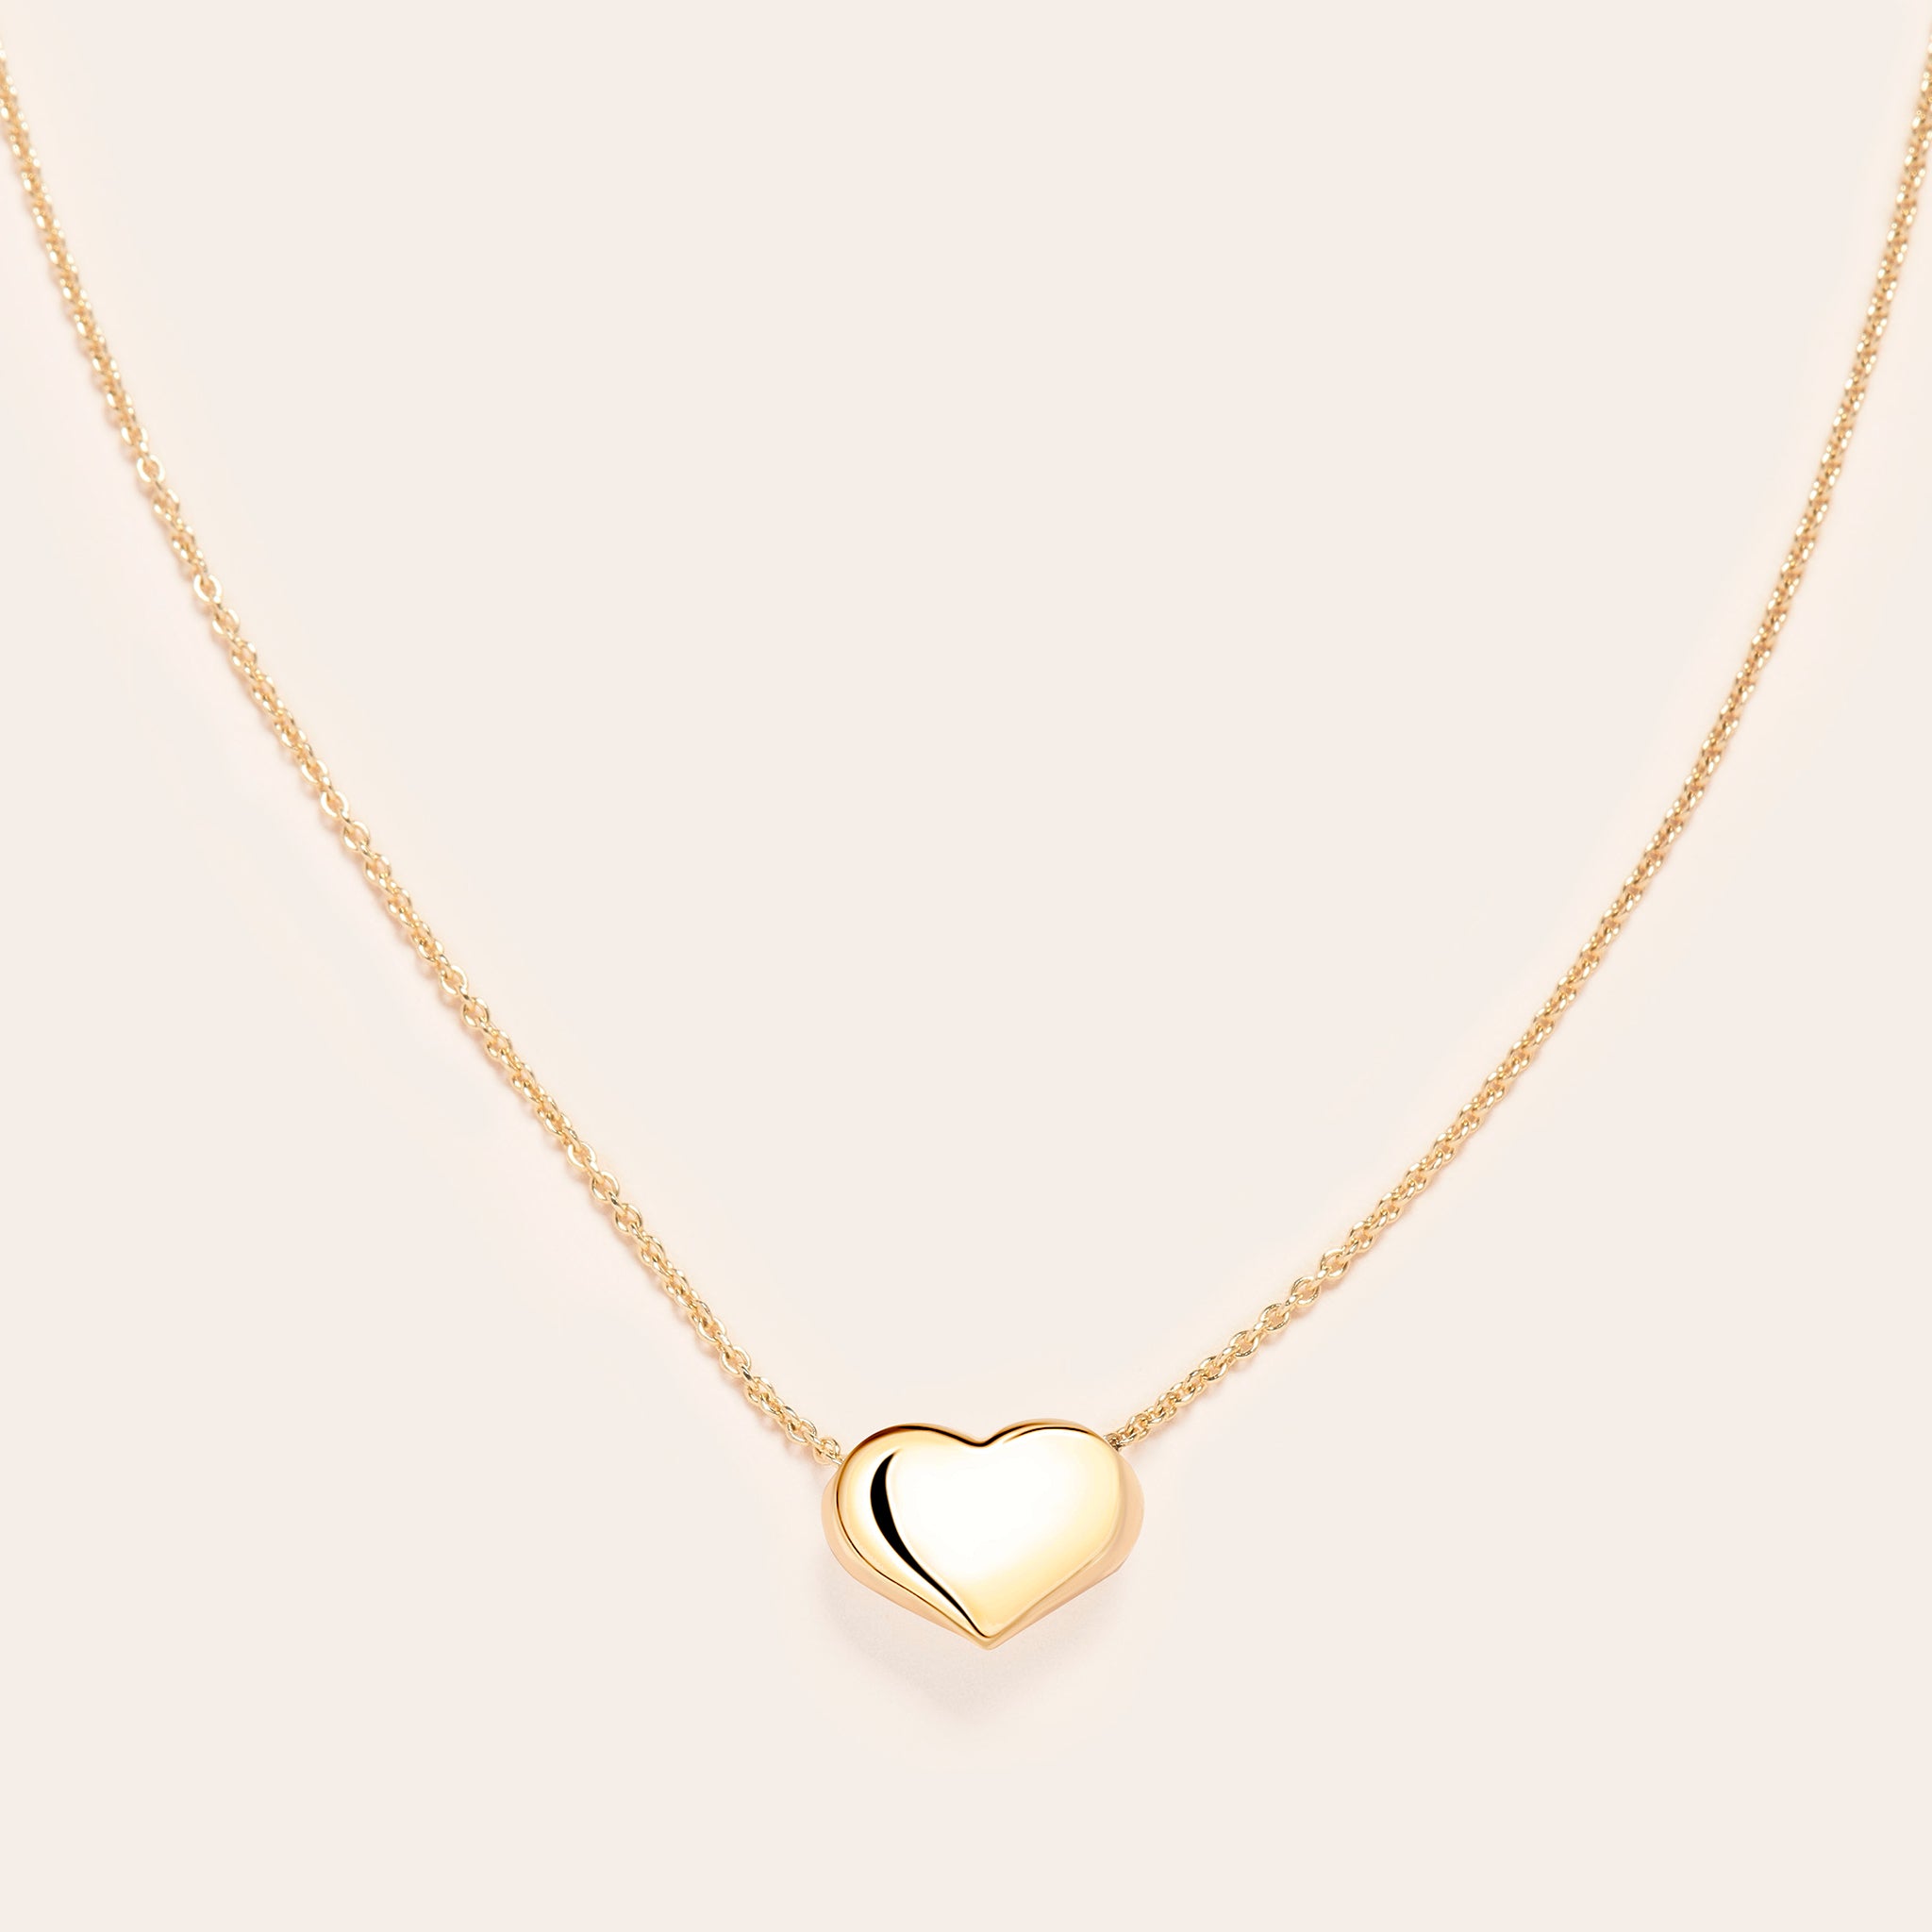 14k gold puffed hear necklace